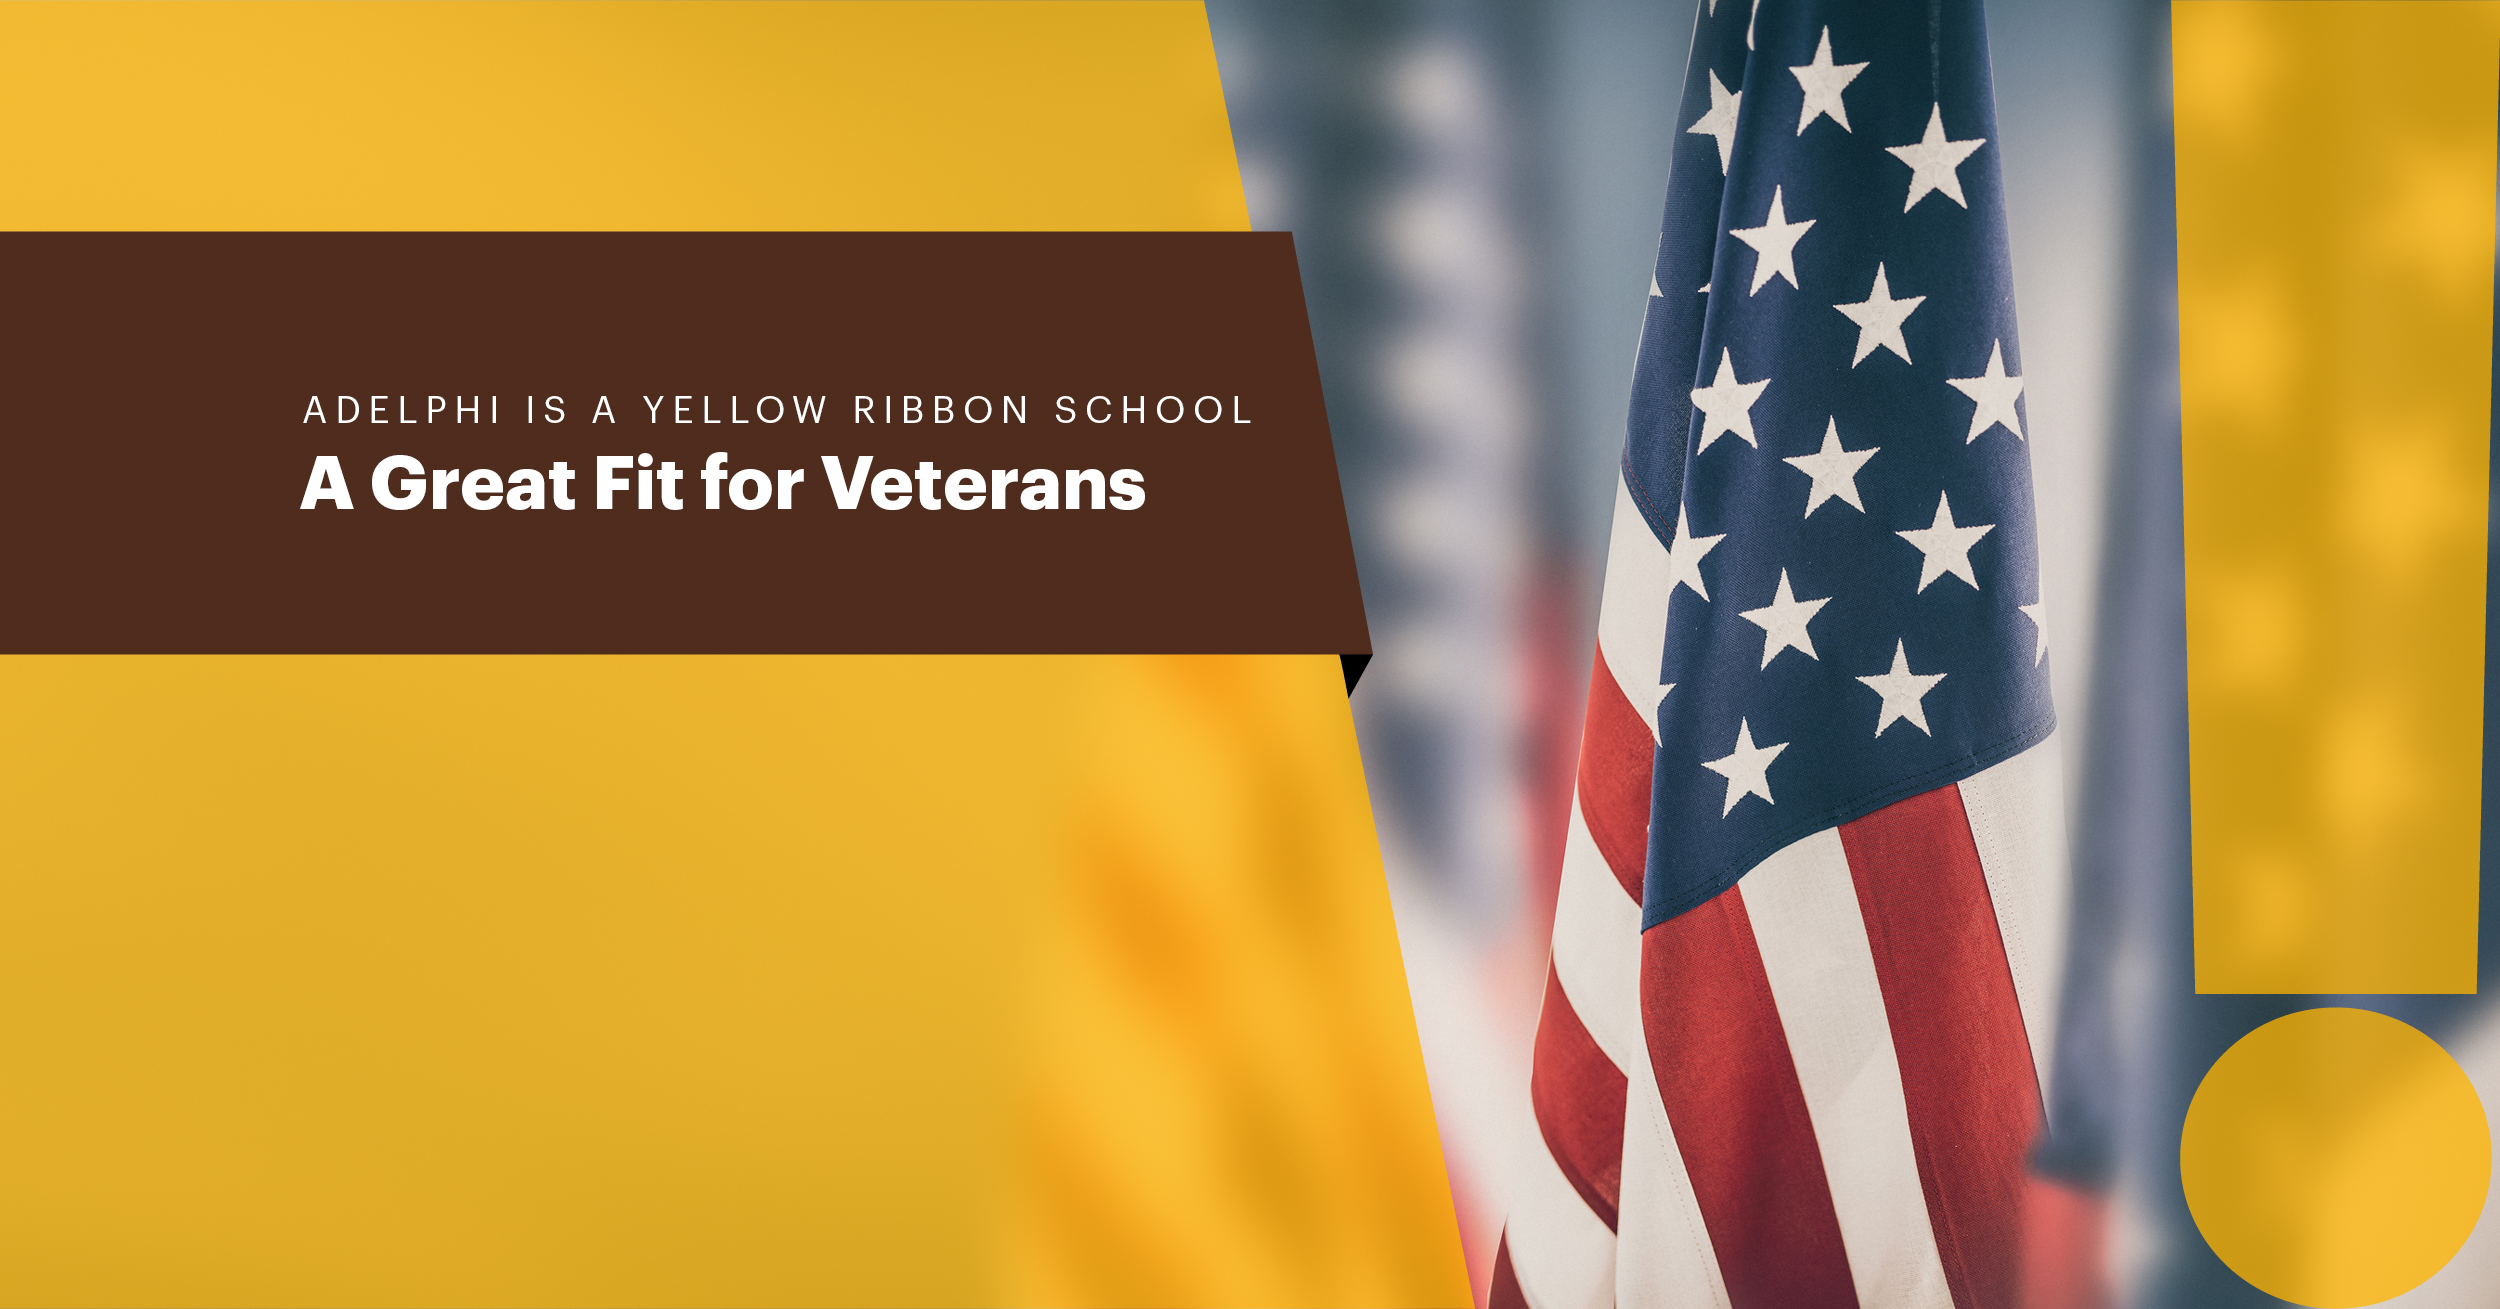 Adelphi is a Yellow Ribbon School A Great Fit for Veterans